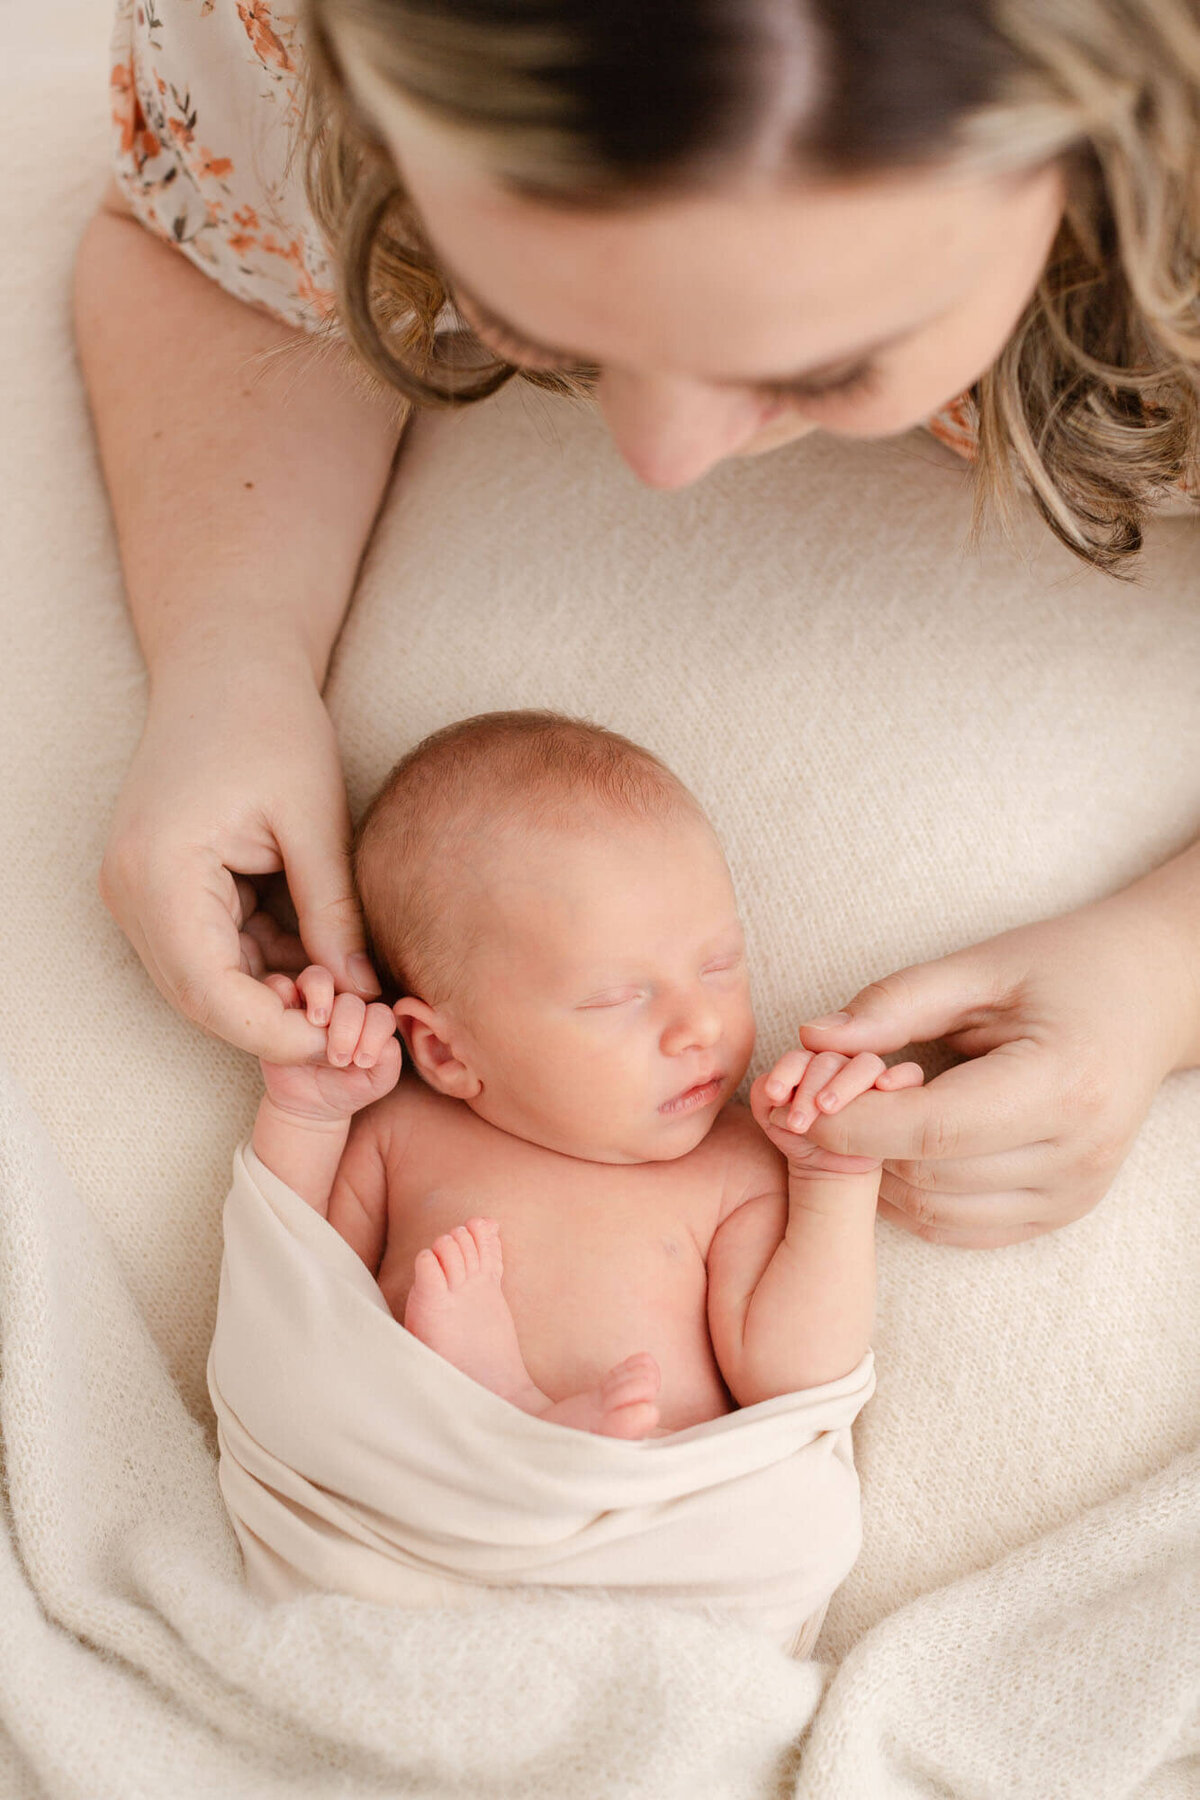 Baby is sleeping peacefully on back with arms up by face and holding Mama's hands. The top of Mama's head is visible in this image, but the focus is on the baby and Mom holding Baby's hands.